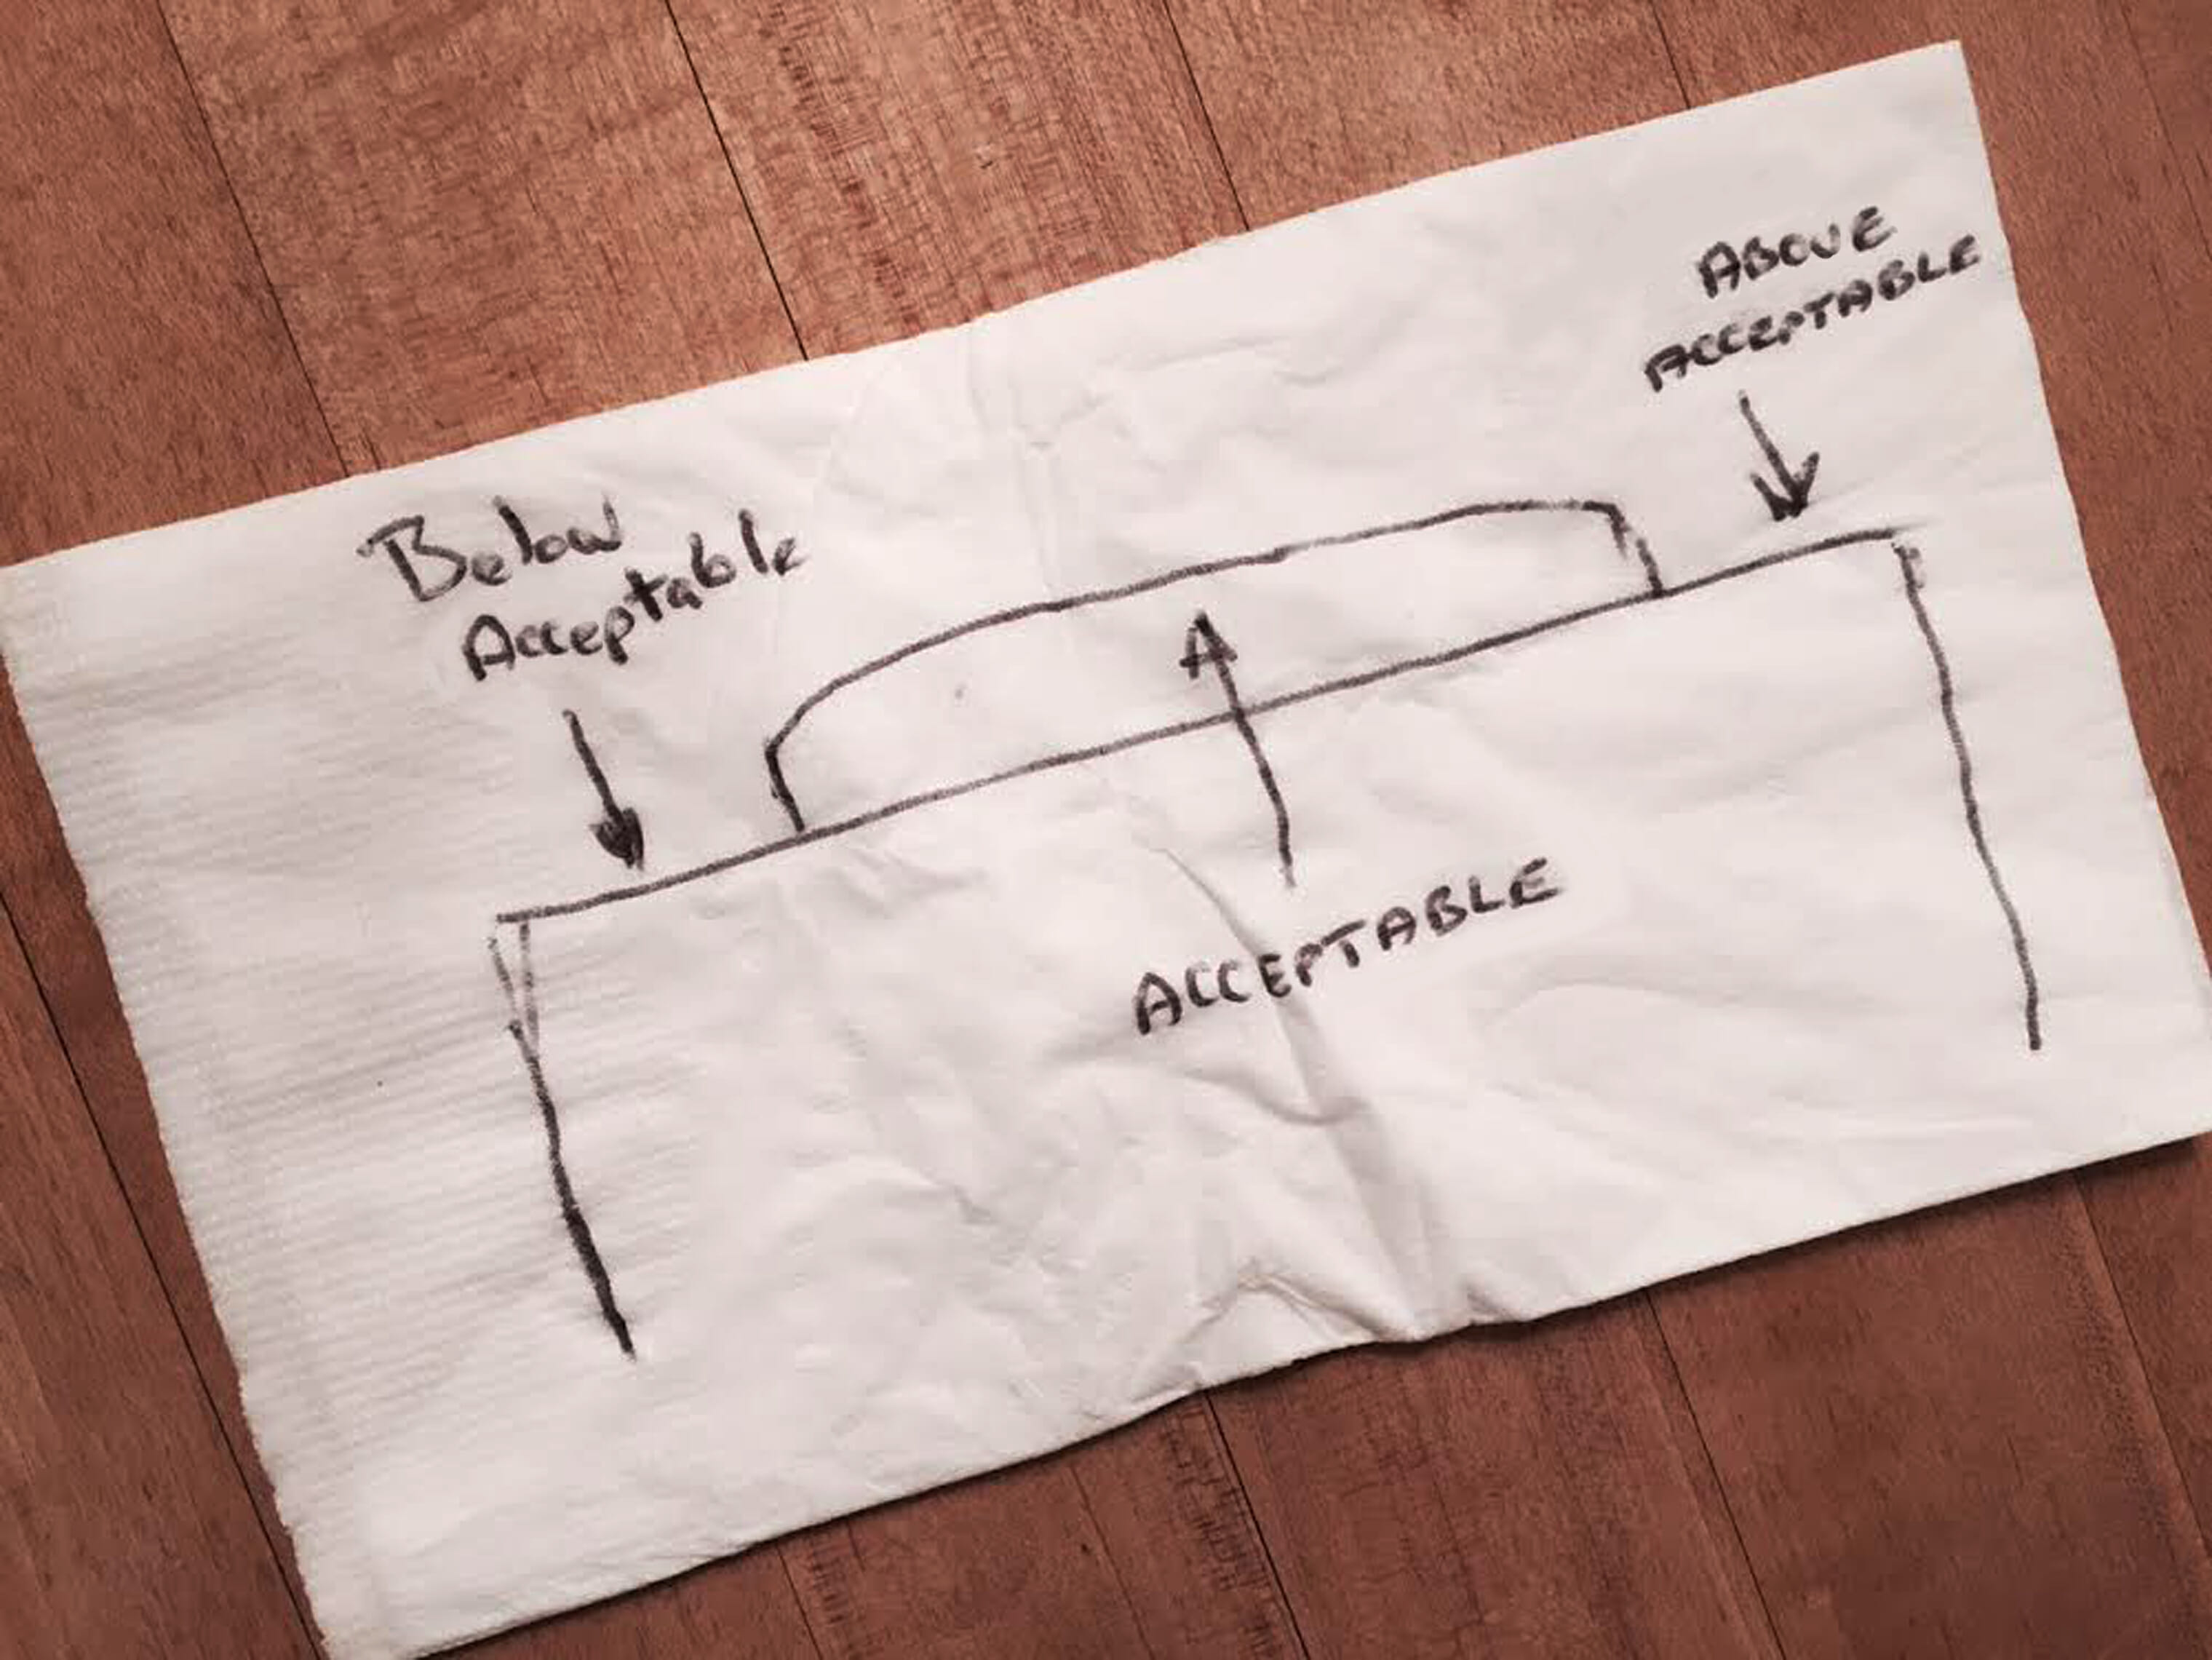 Paper Napkin Strategy - What’s Acceptable? | Atkinson Consulting